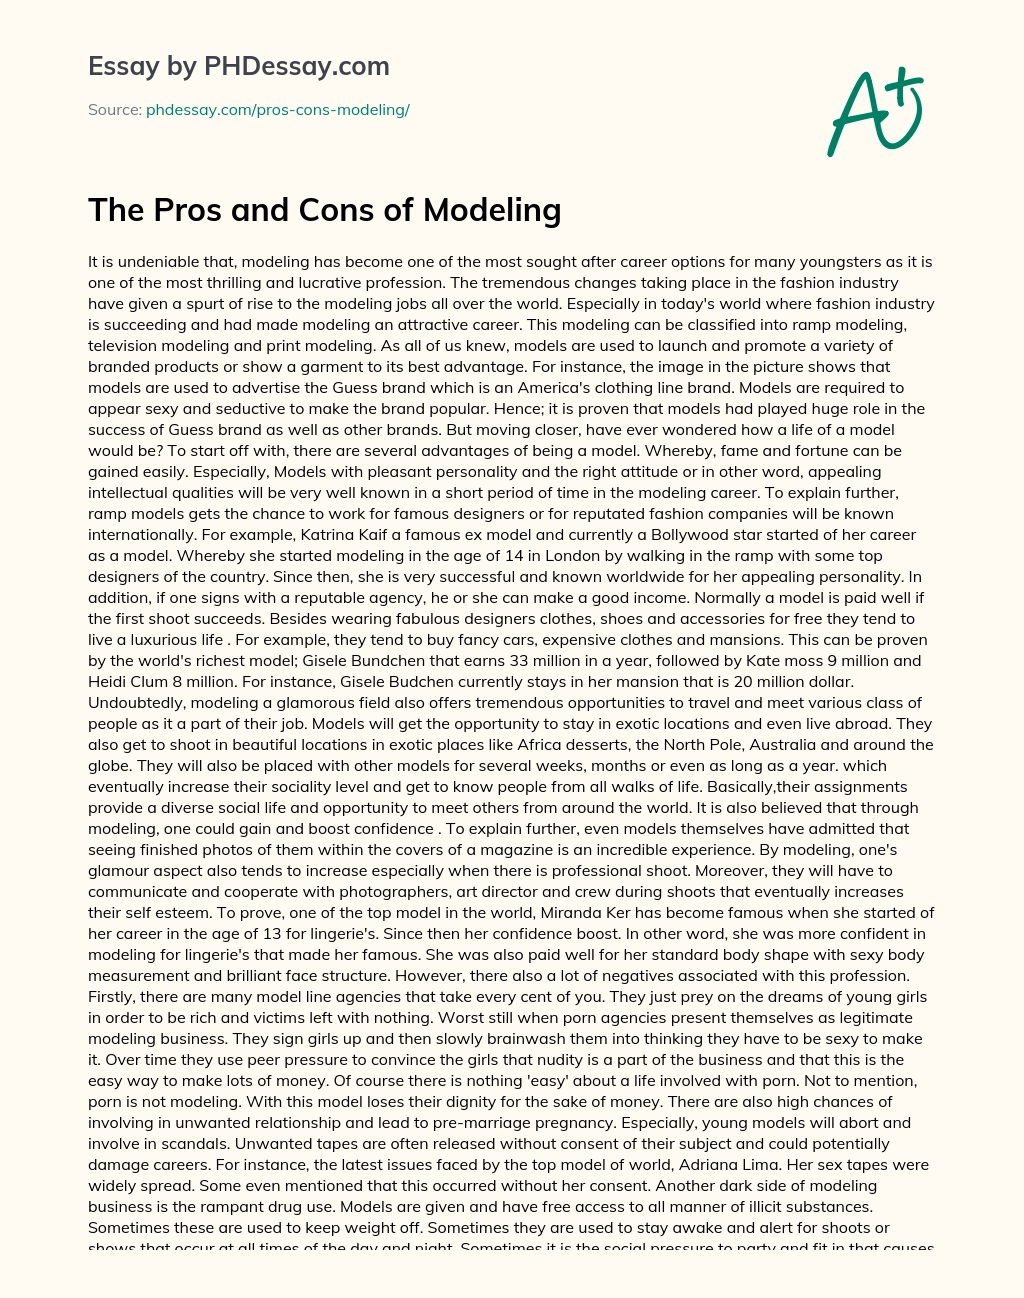 The Pros and Cons of Modeling essay